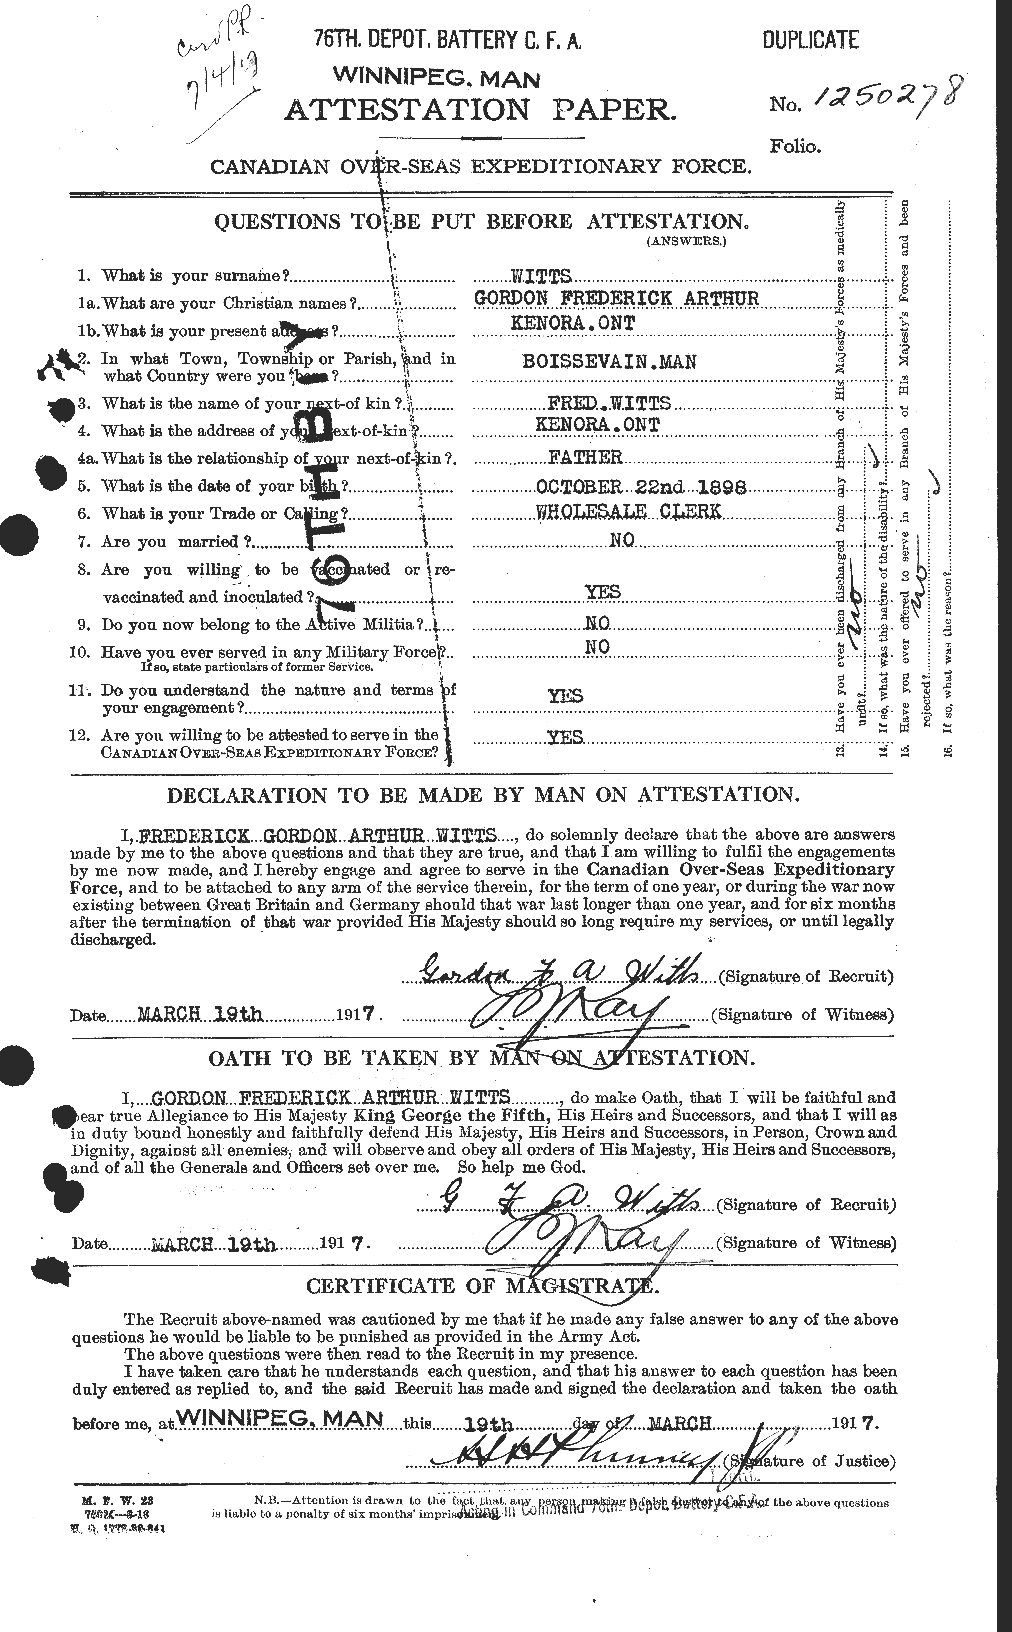 Personnel Records of the First World War - CEF 682148a